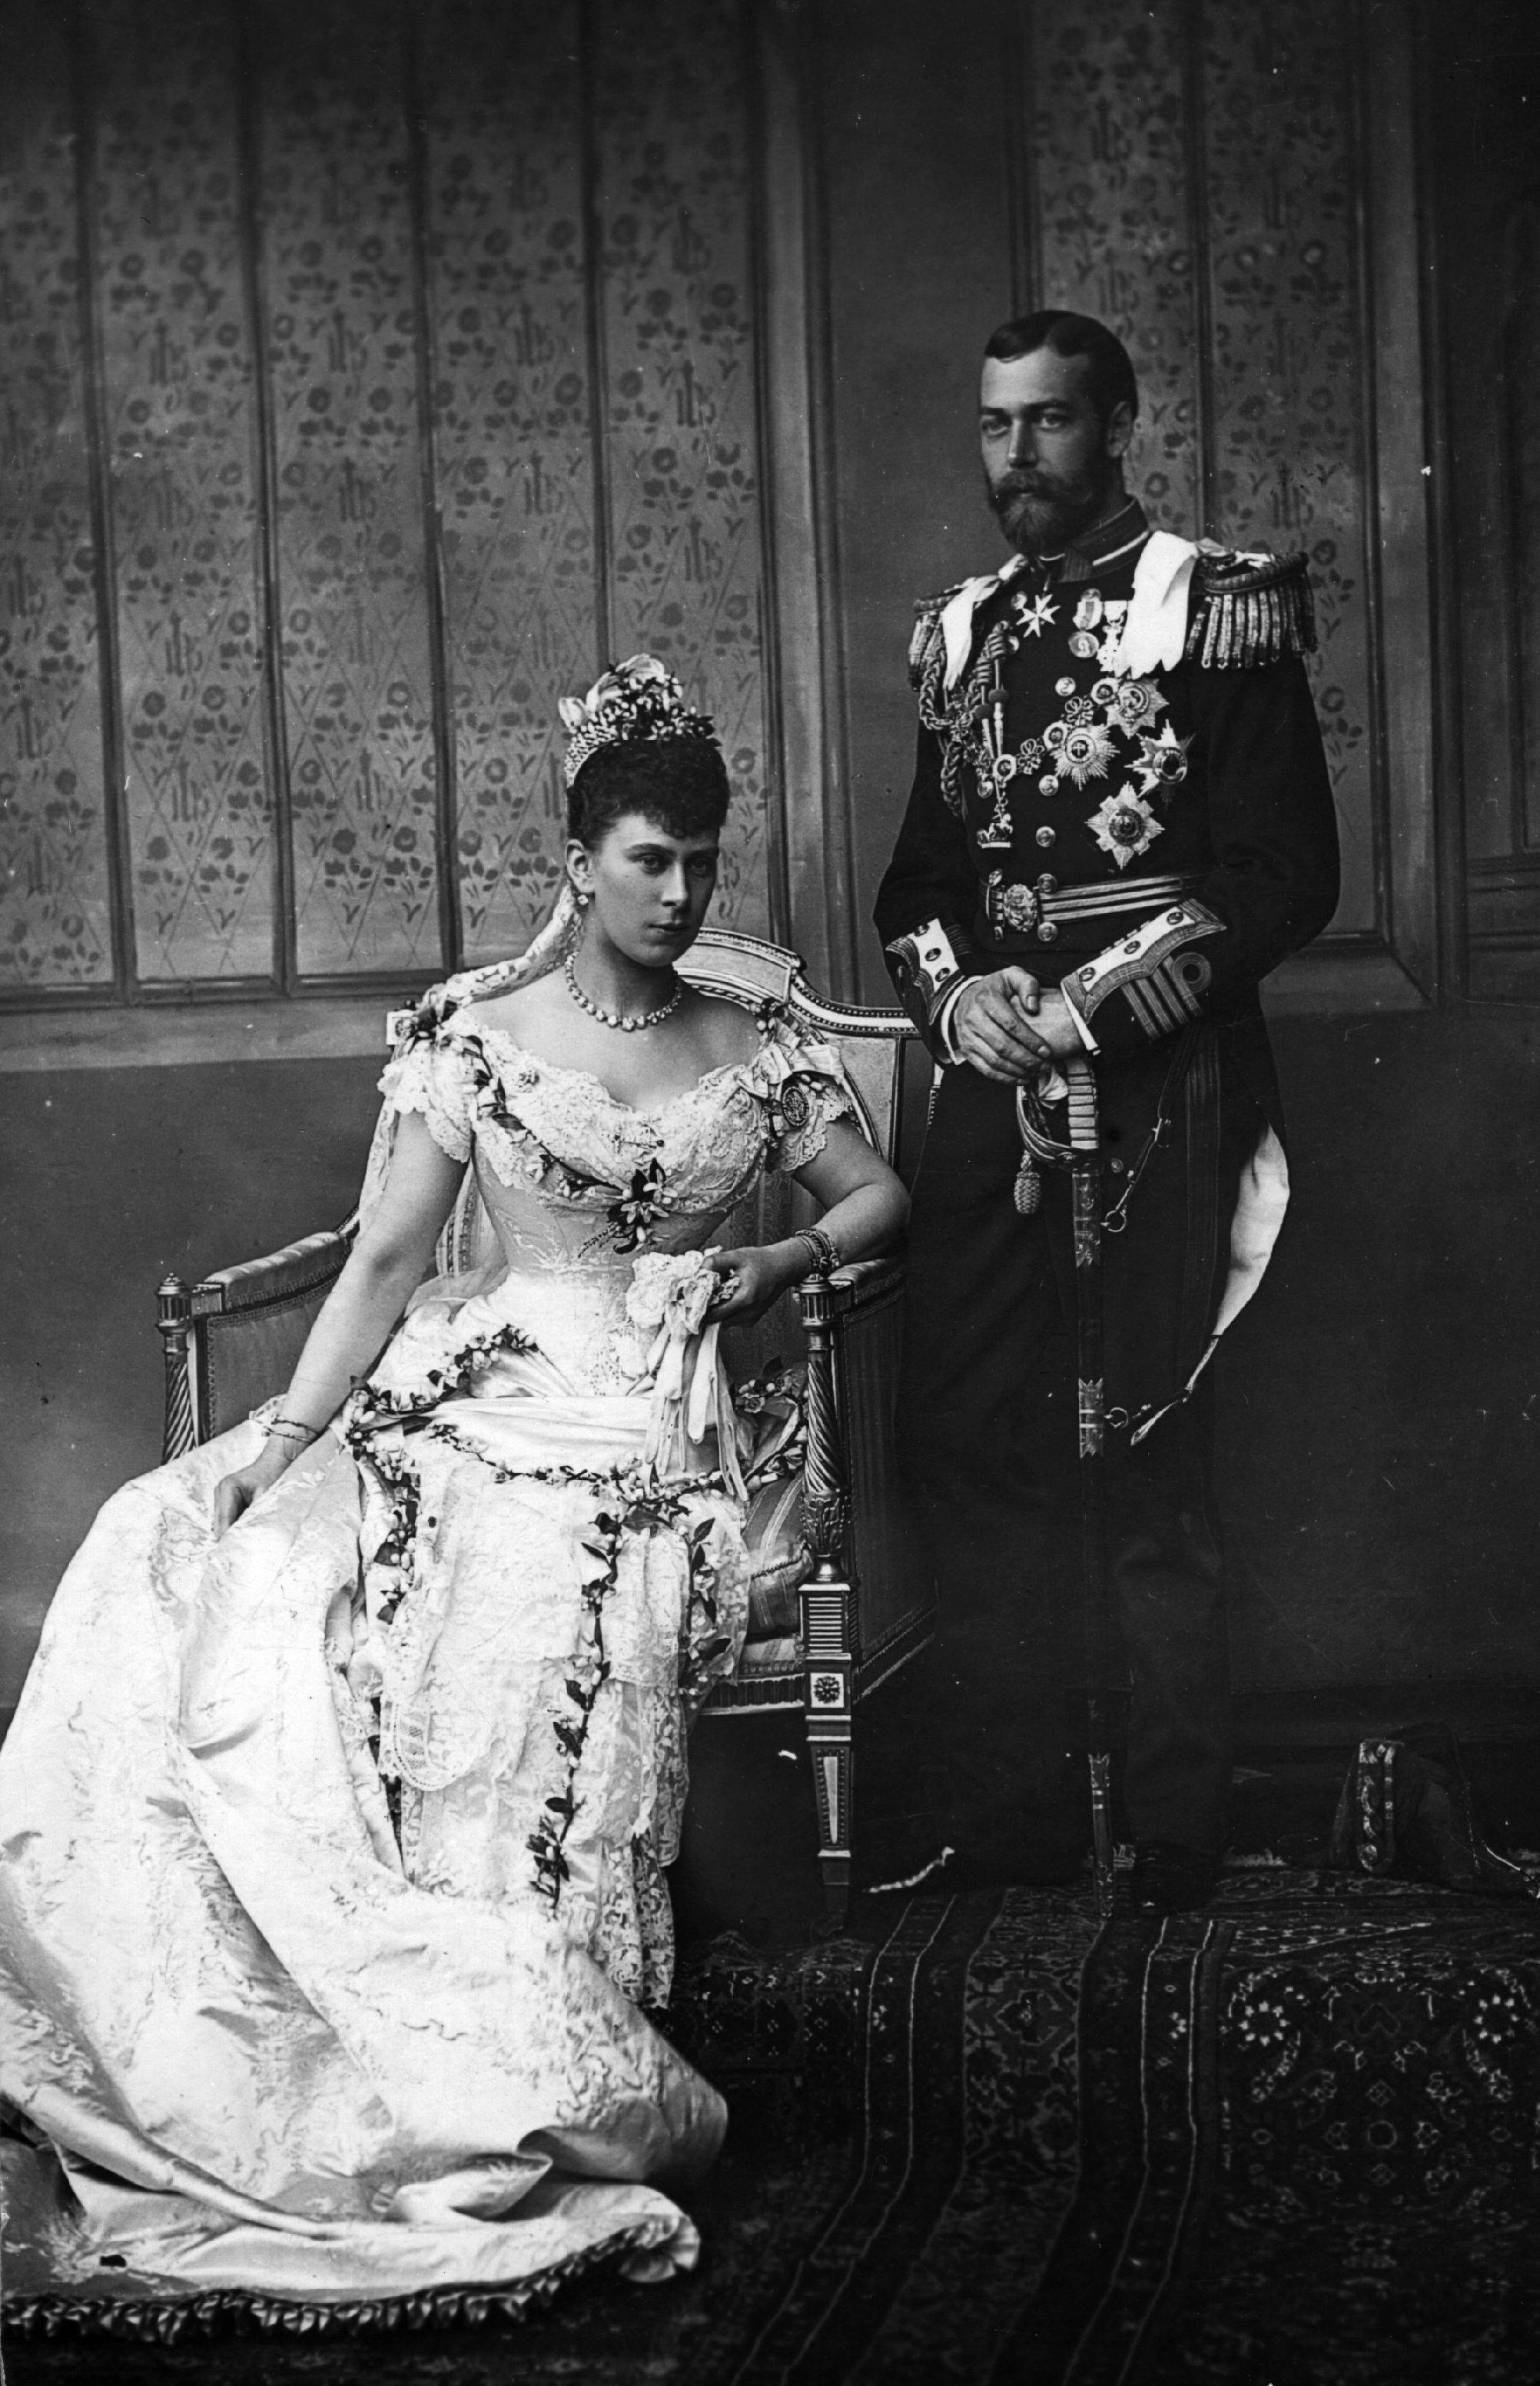 King George V on his wedding day with his bride Princess Mary of Teck on July 6, 1893.